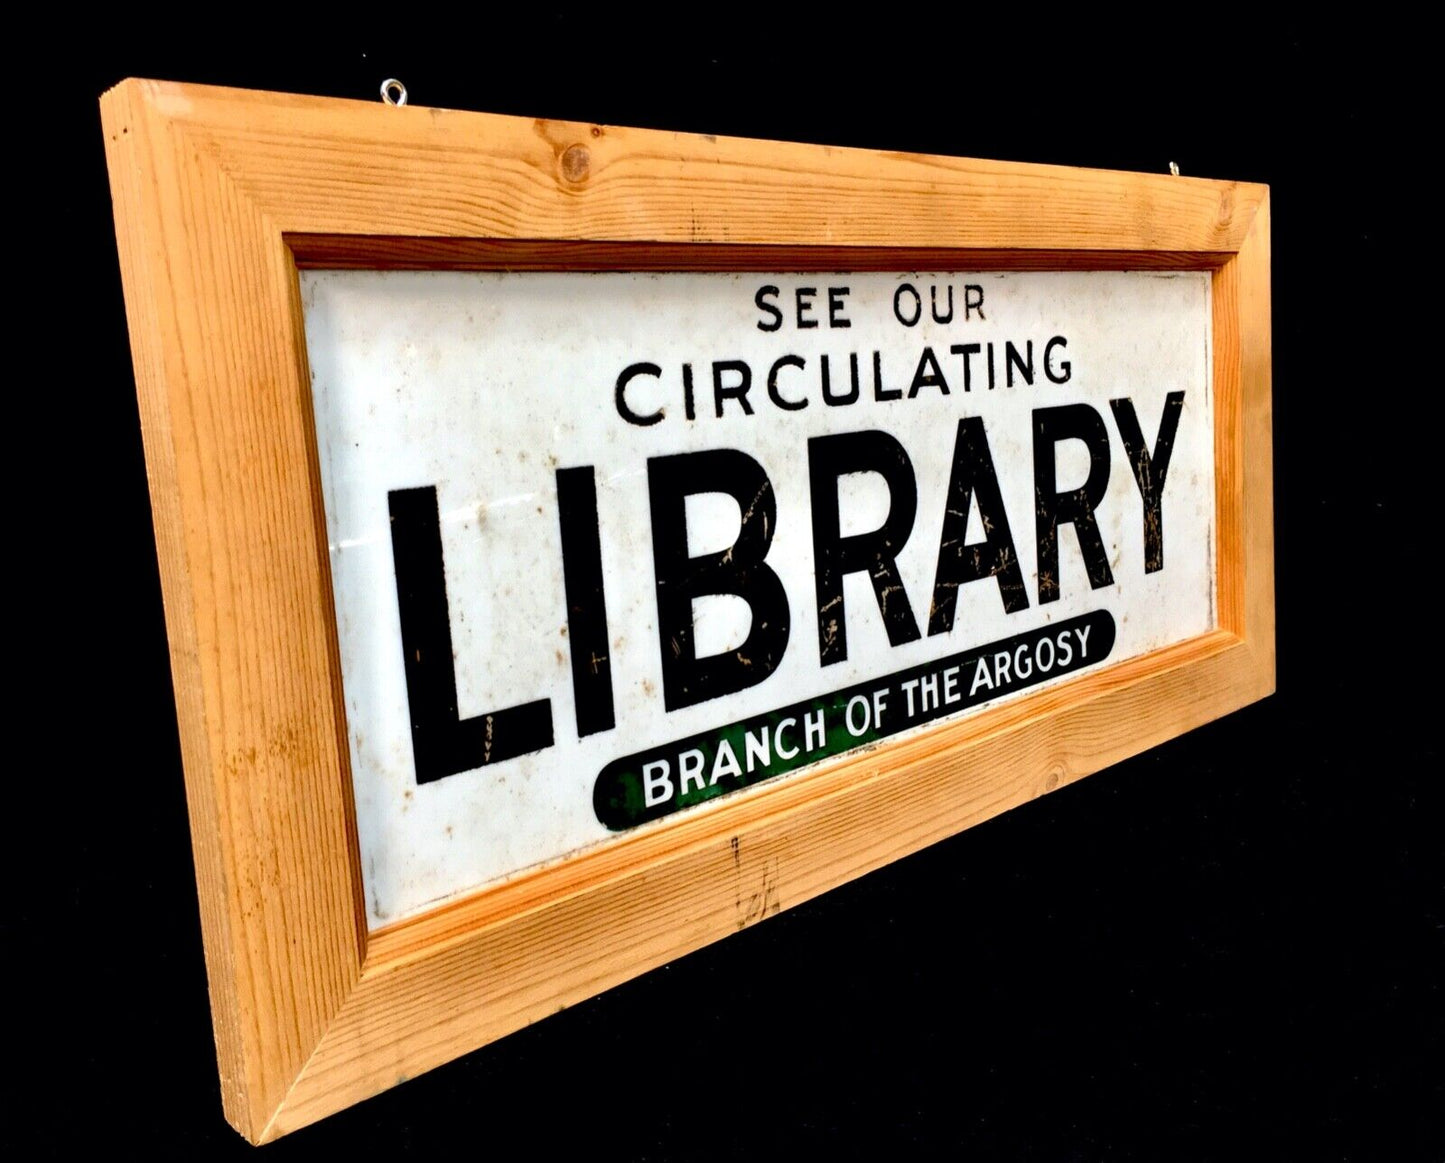 Antique Sign - Library Branch of The Argosy Framed White Glass Panel / Salvaged